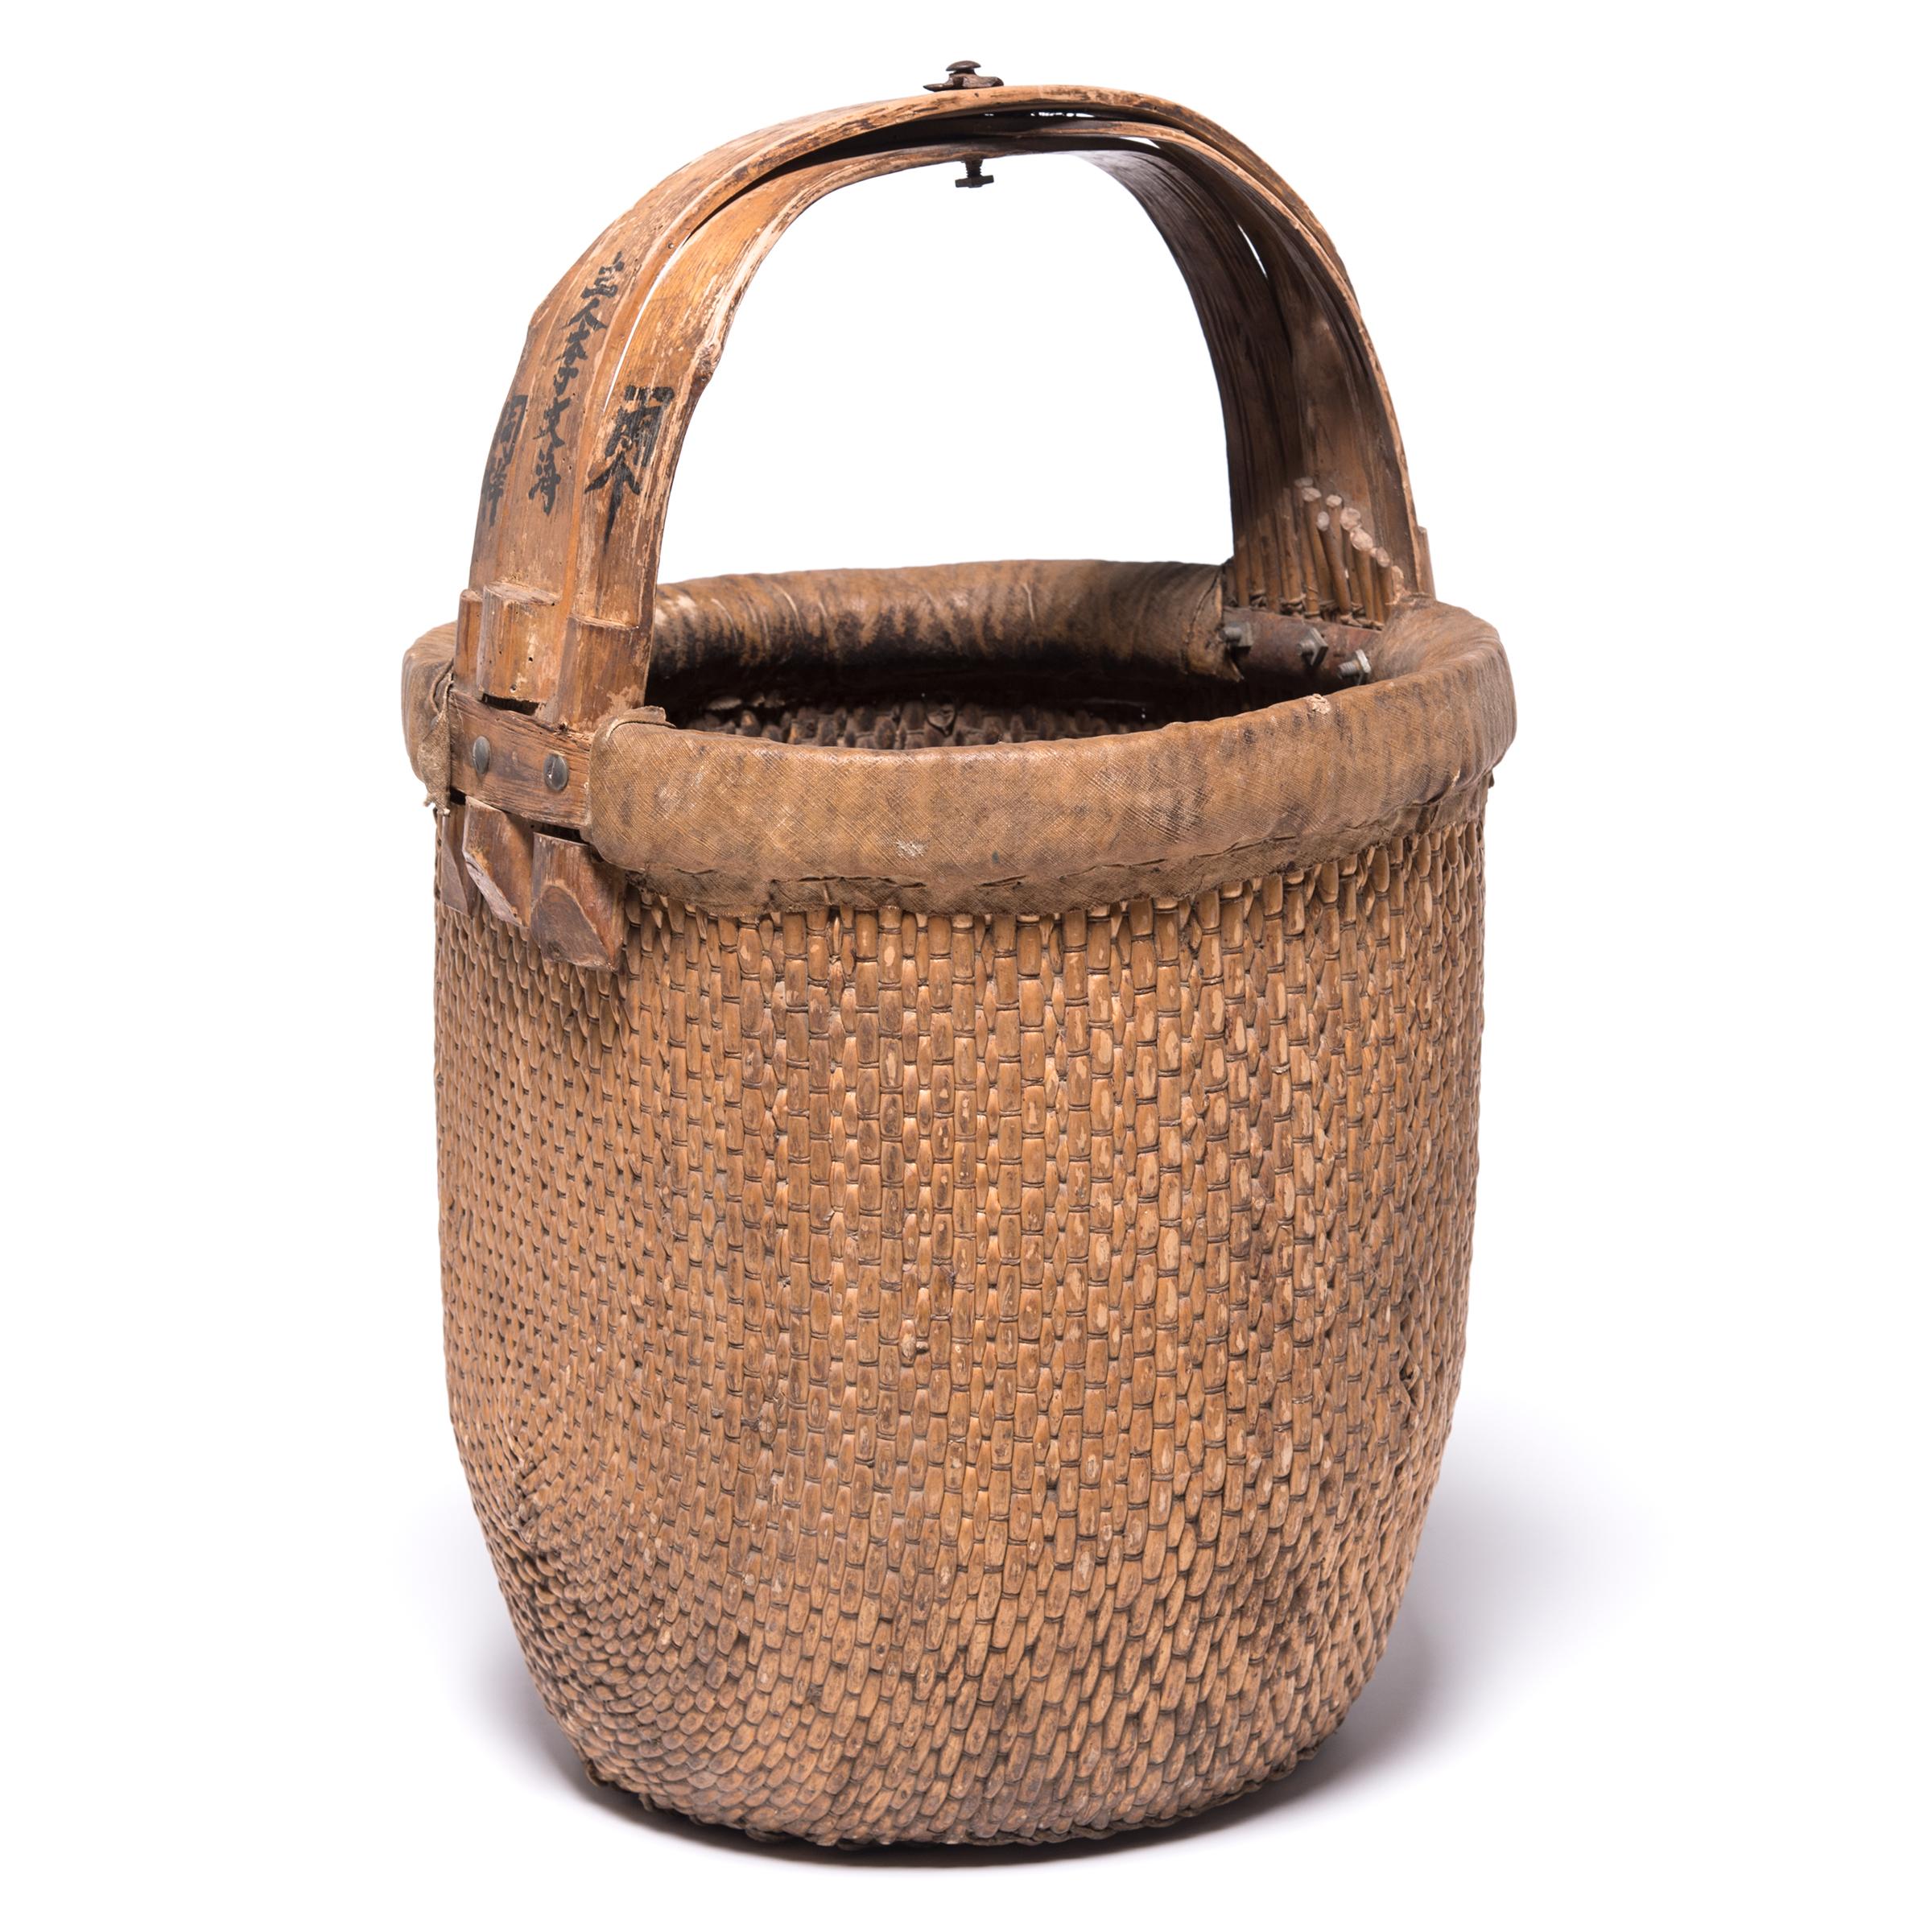 Basket making is an ancient and humble craft, but in the hands of a skilled weaver a simple willow basket can become a truly beautiful work of art. This bent handle basket is closely woven of fine willow strips for an evenly textured surface and